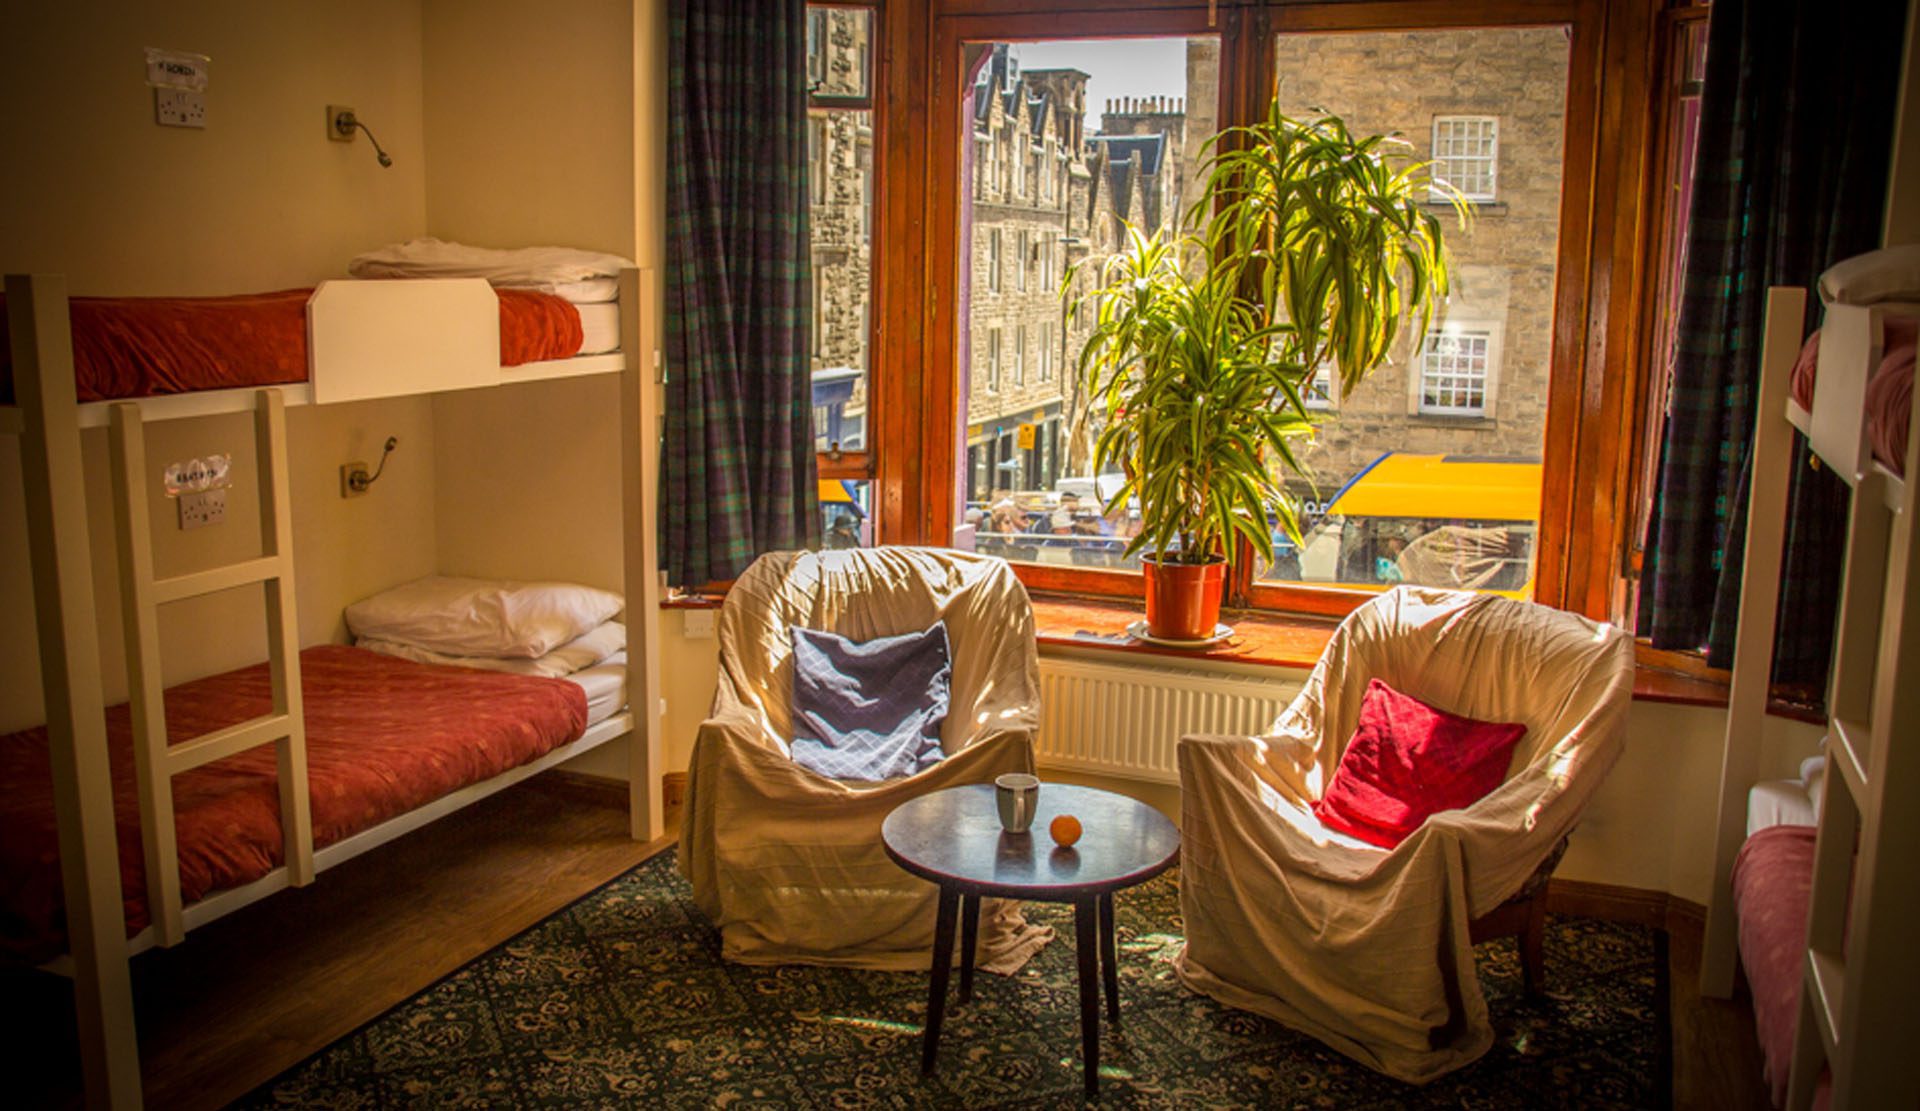 This image depects the sleeping arrangements at Royal Mile backpackers in Edinburgh. There are cosy looking bunk beds and a plant in the big window and chairs with cushions to sit on 